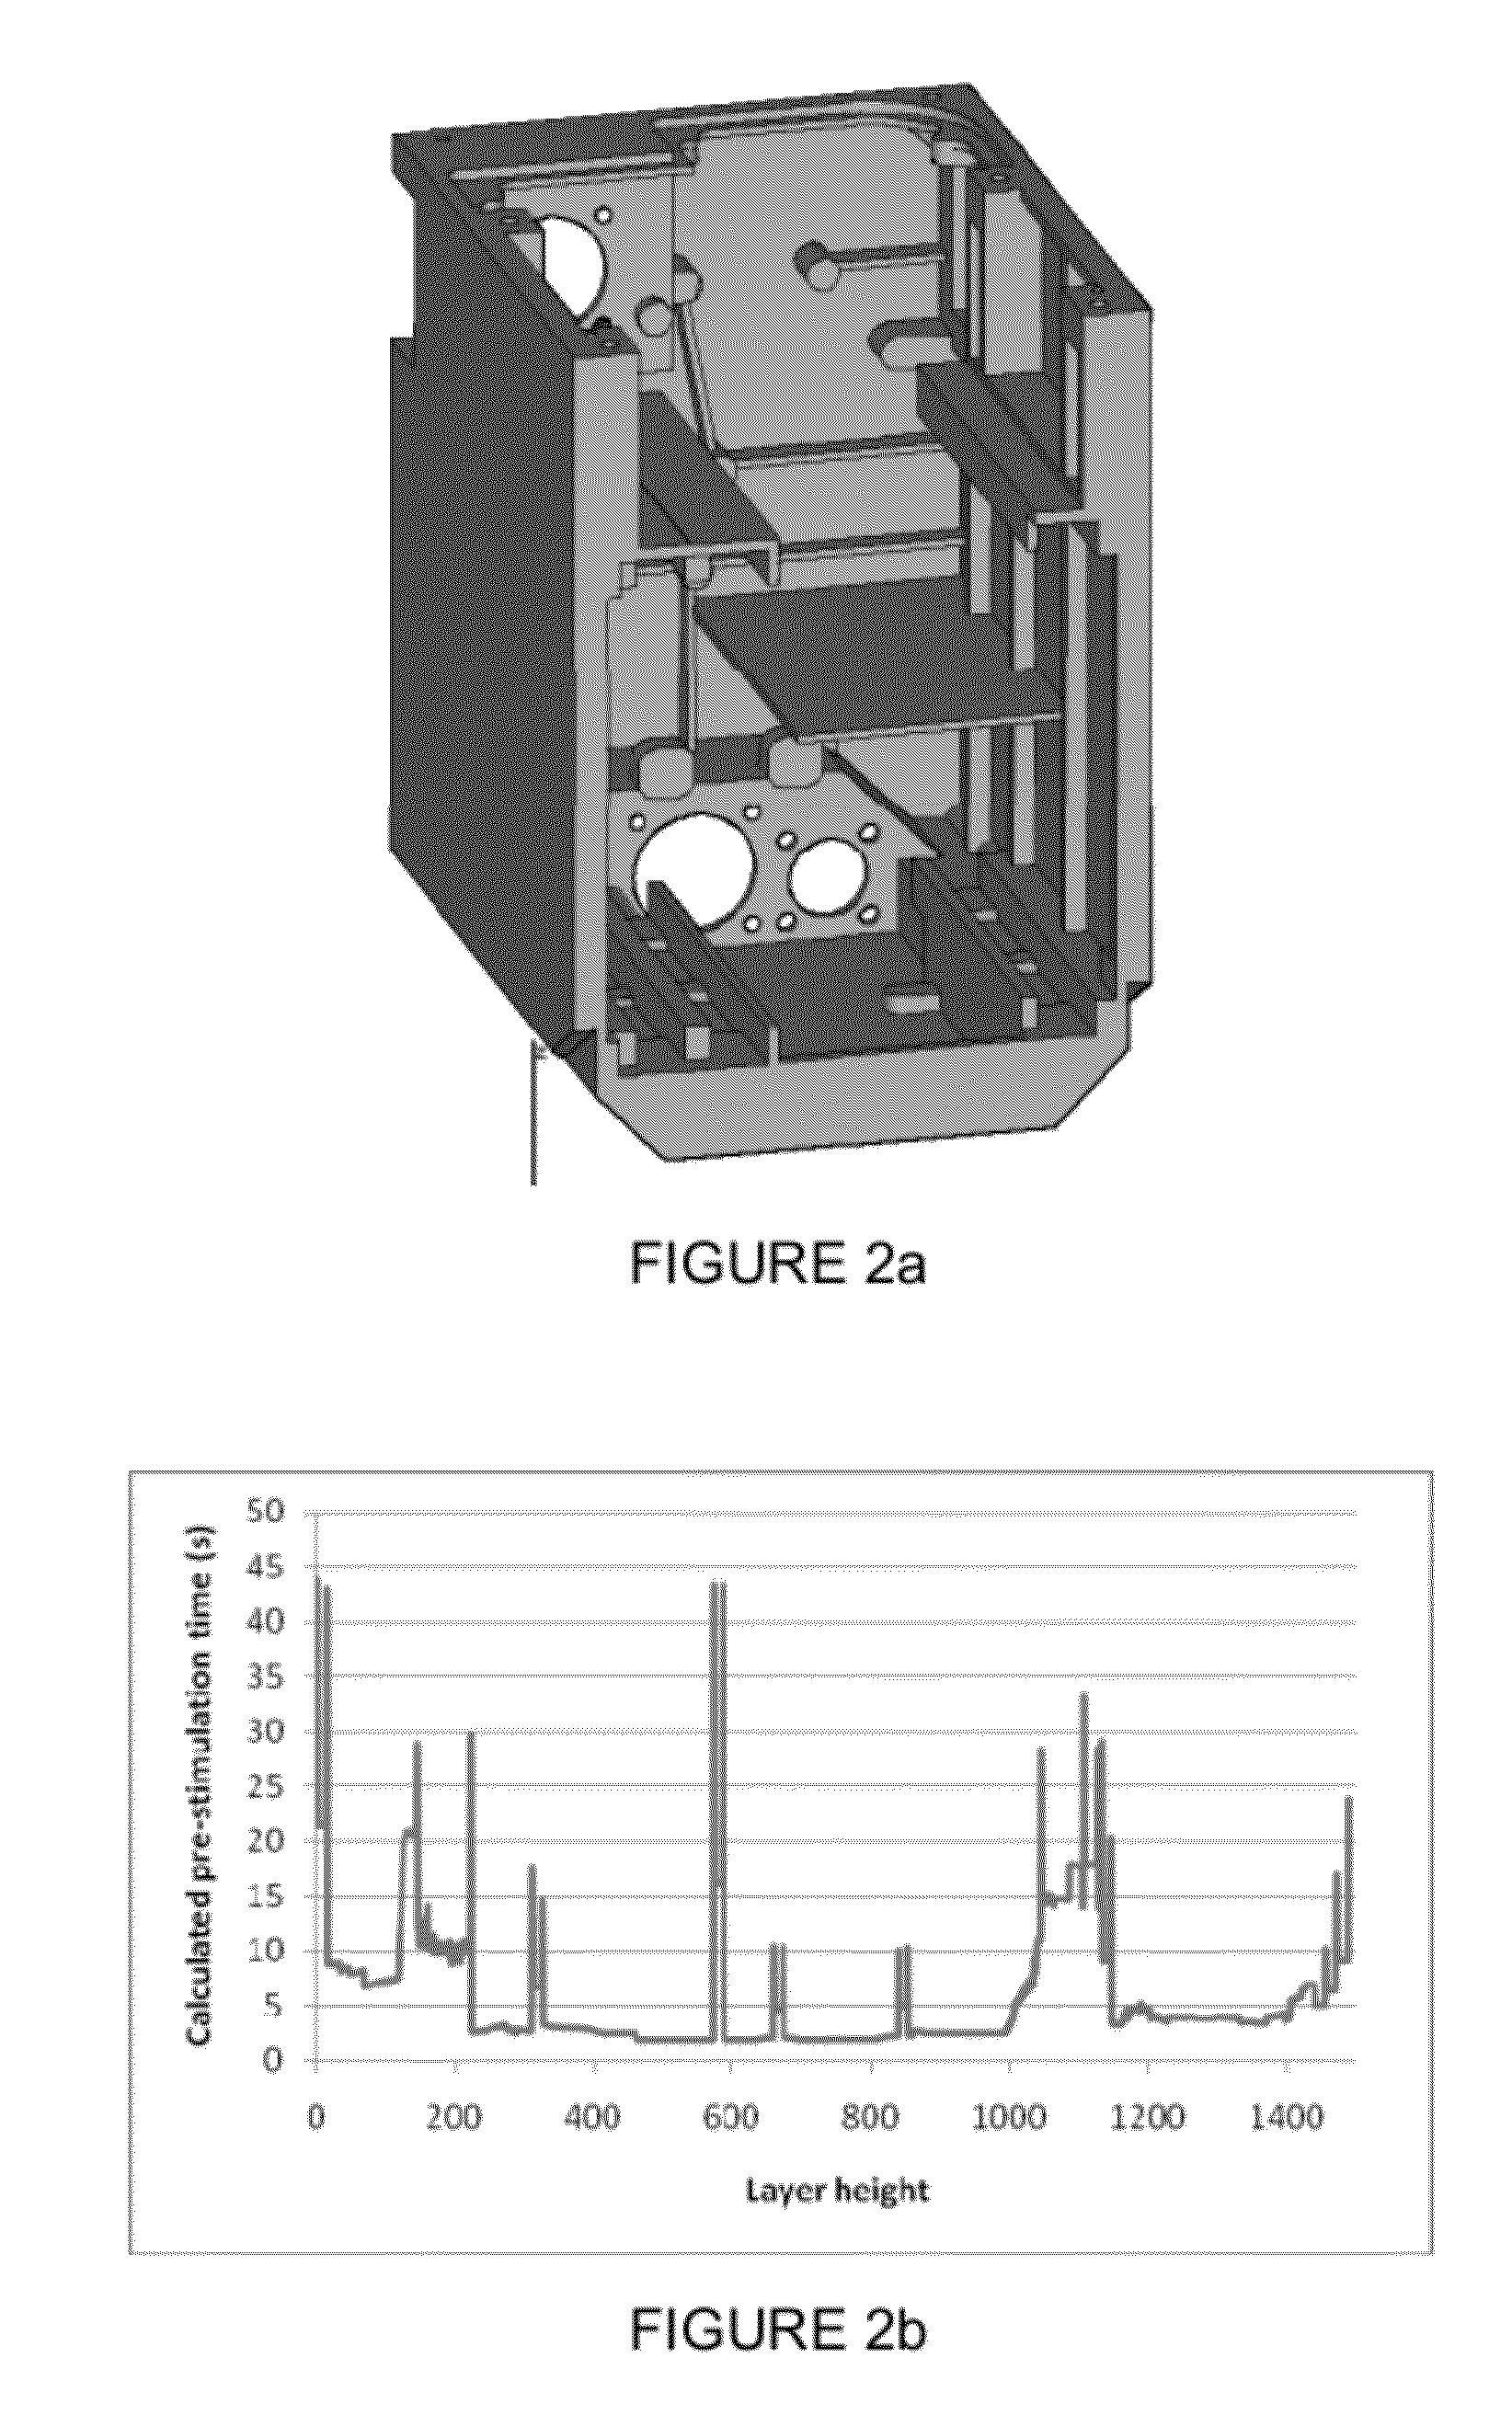 Method for reducing differential shrinkage in stereolithography